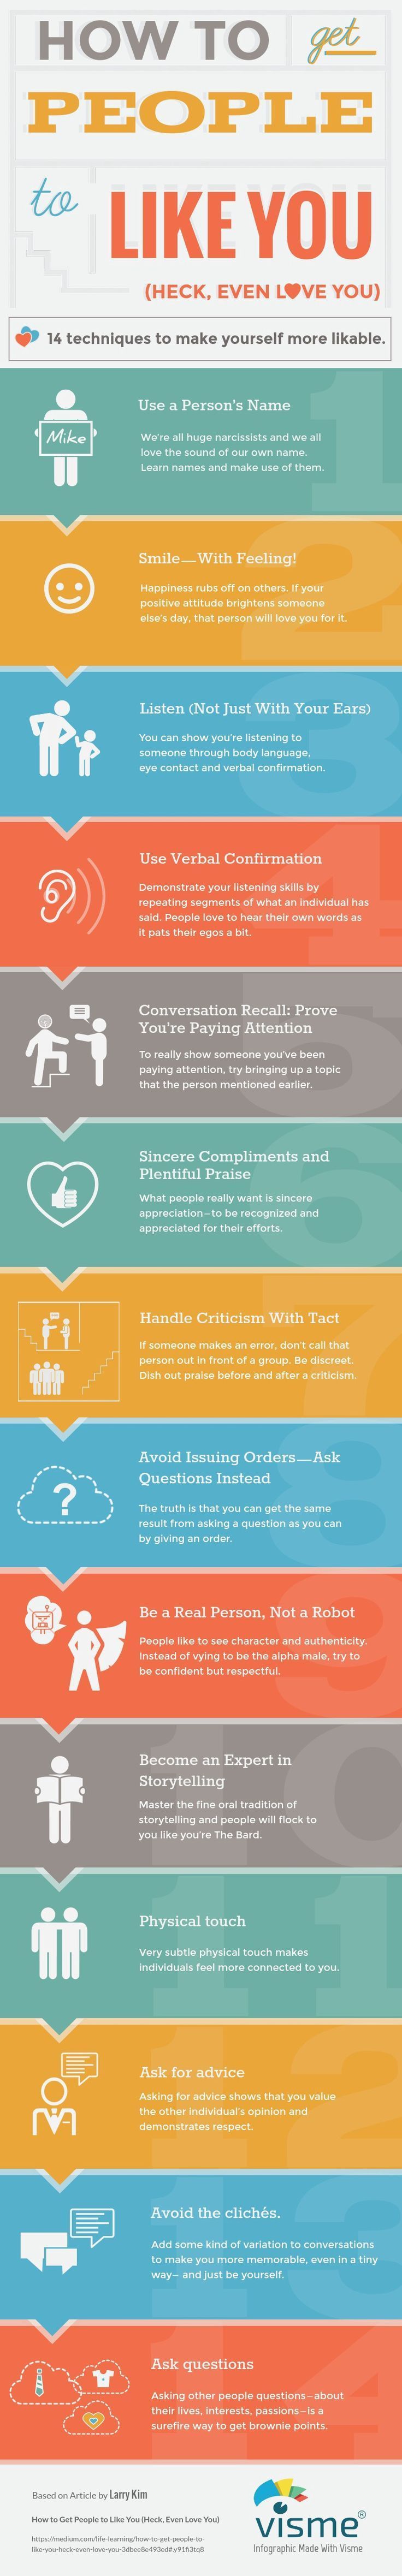 Psychology-Infographic-Psychology-Psychology-We-all-care-about-what-others-think-of-us-and-want-to Psychology Infographic : Psychology : Psychology : We all care about what others think of us and want to ...